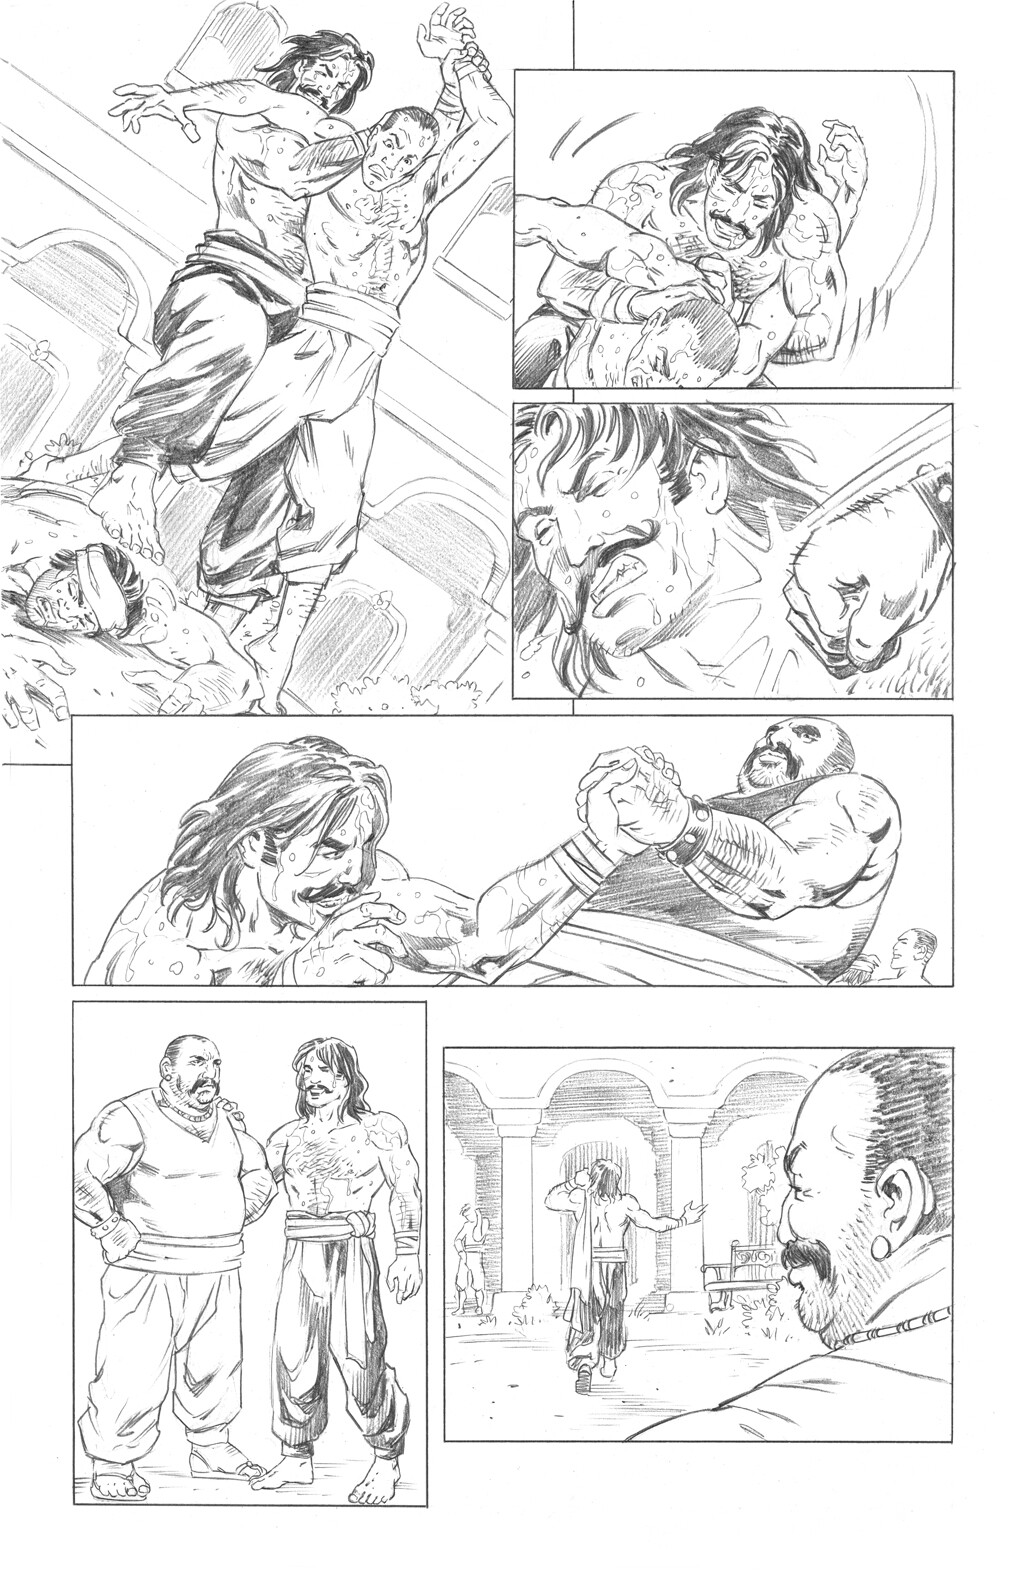 Scions of the Cursed King 
Page 21 pencils.